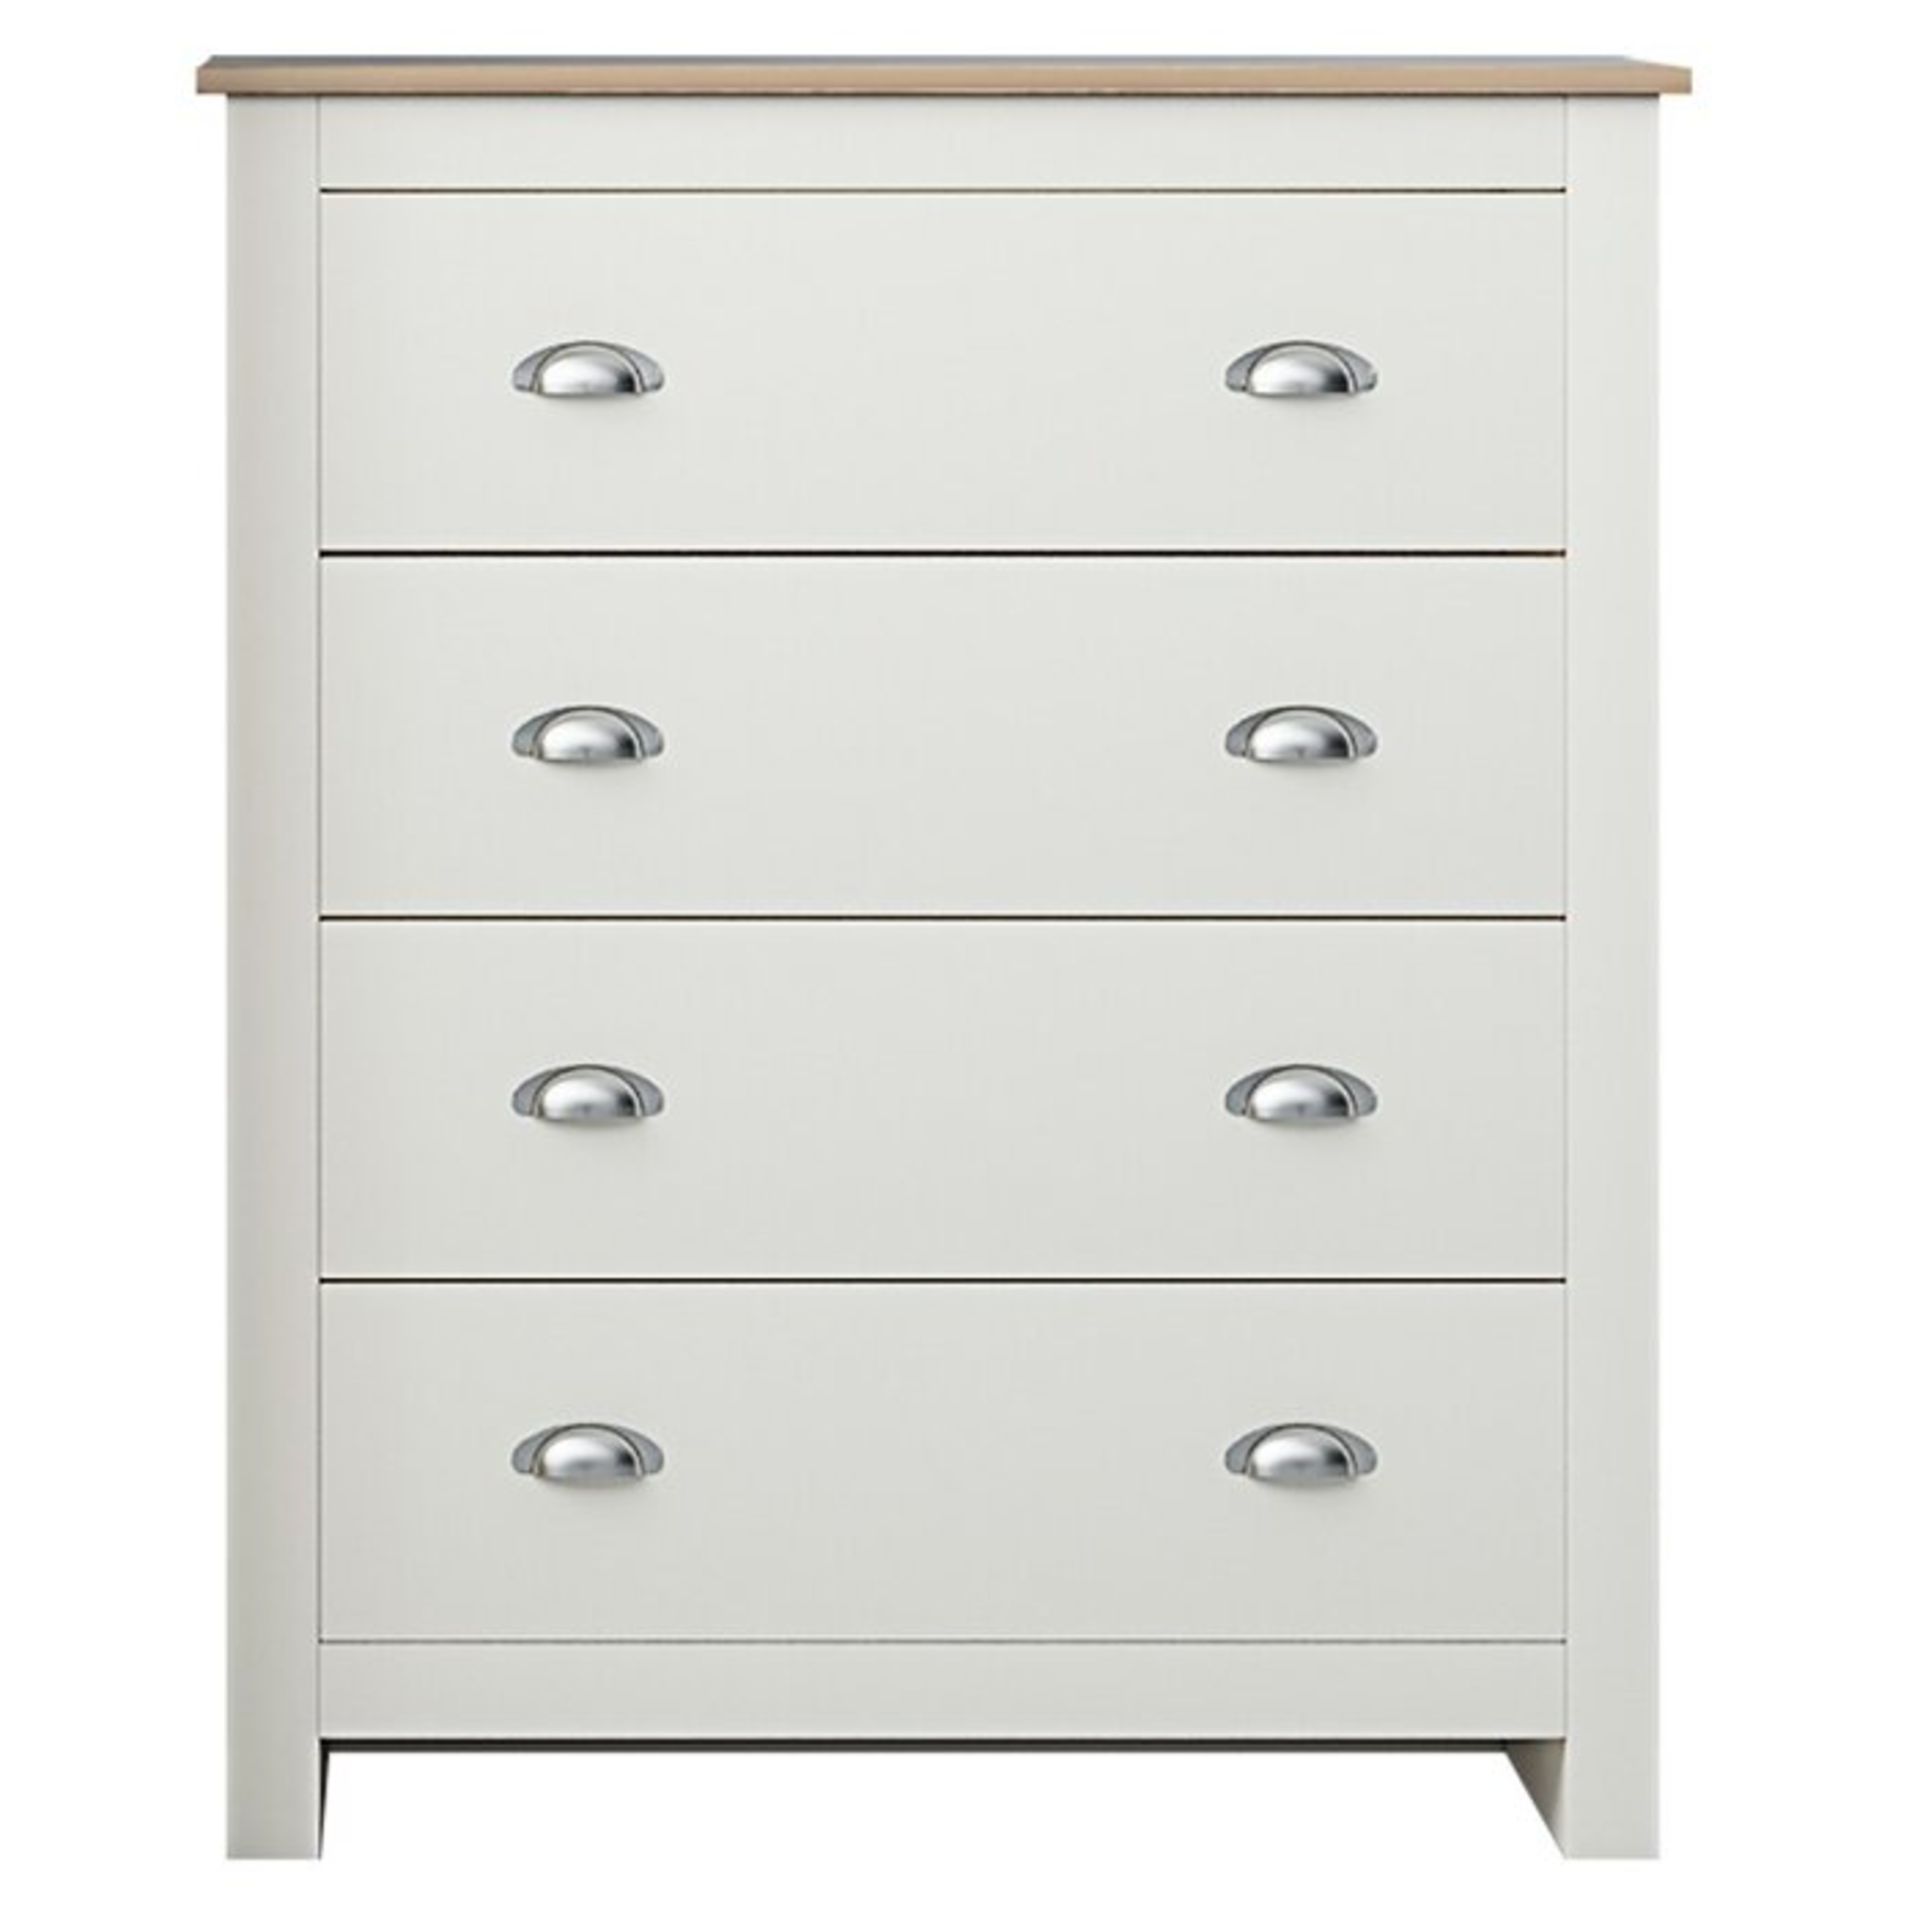 Crestwood 4 Drawer Chest - RRP £159.00 - Image 2 of 2